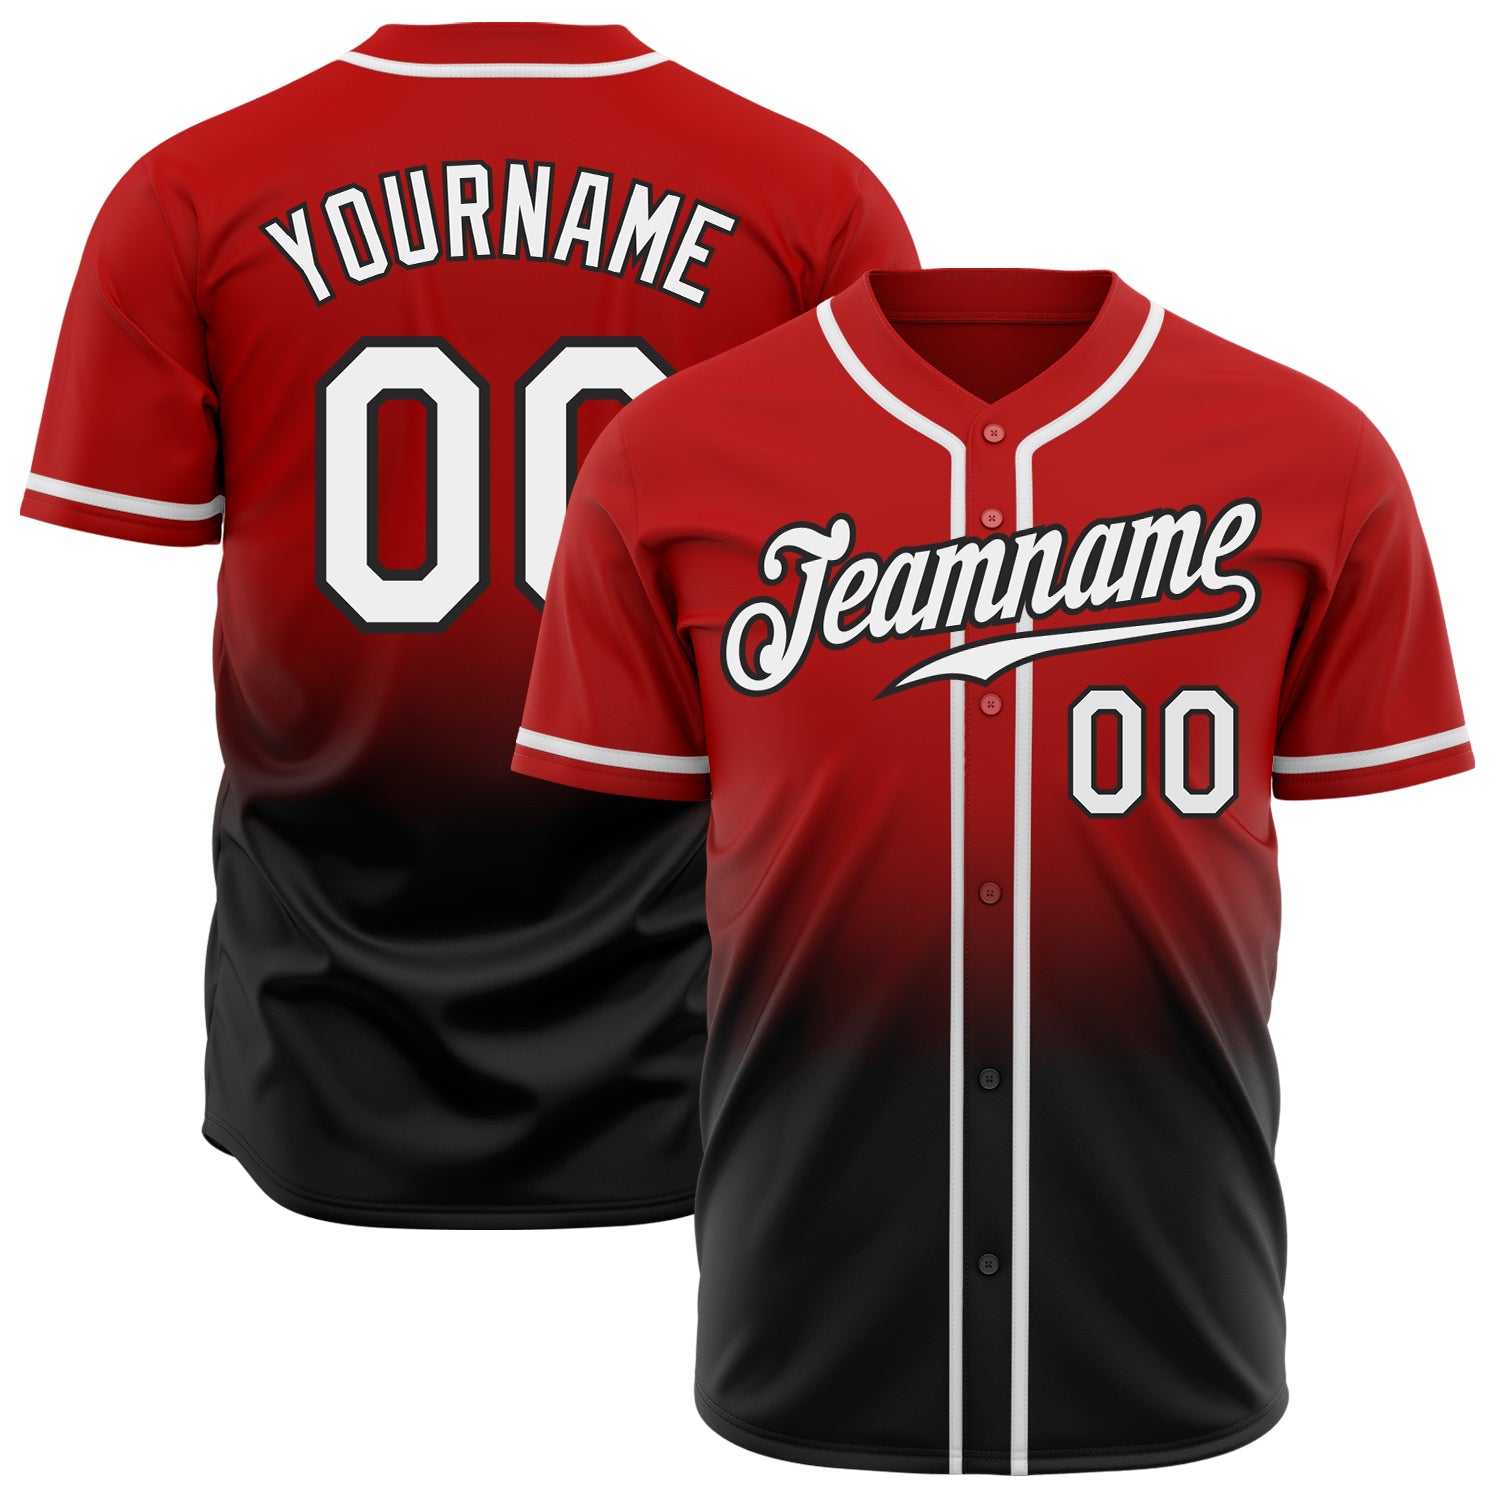 Red and Black 2 button baseball jersey with team name in tackle